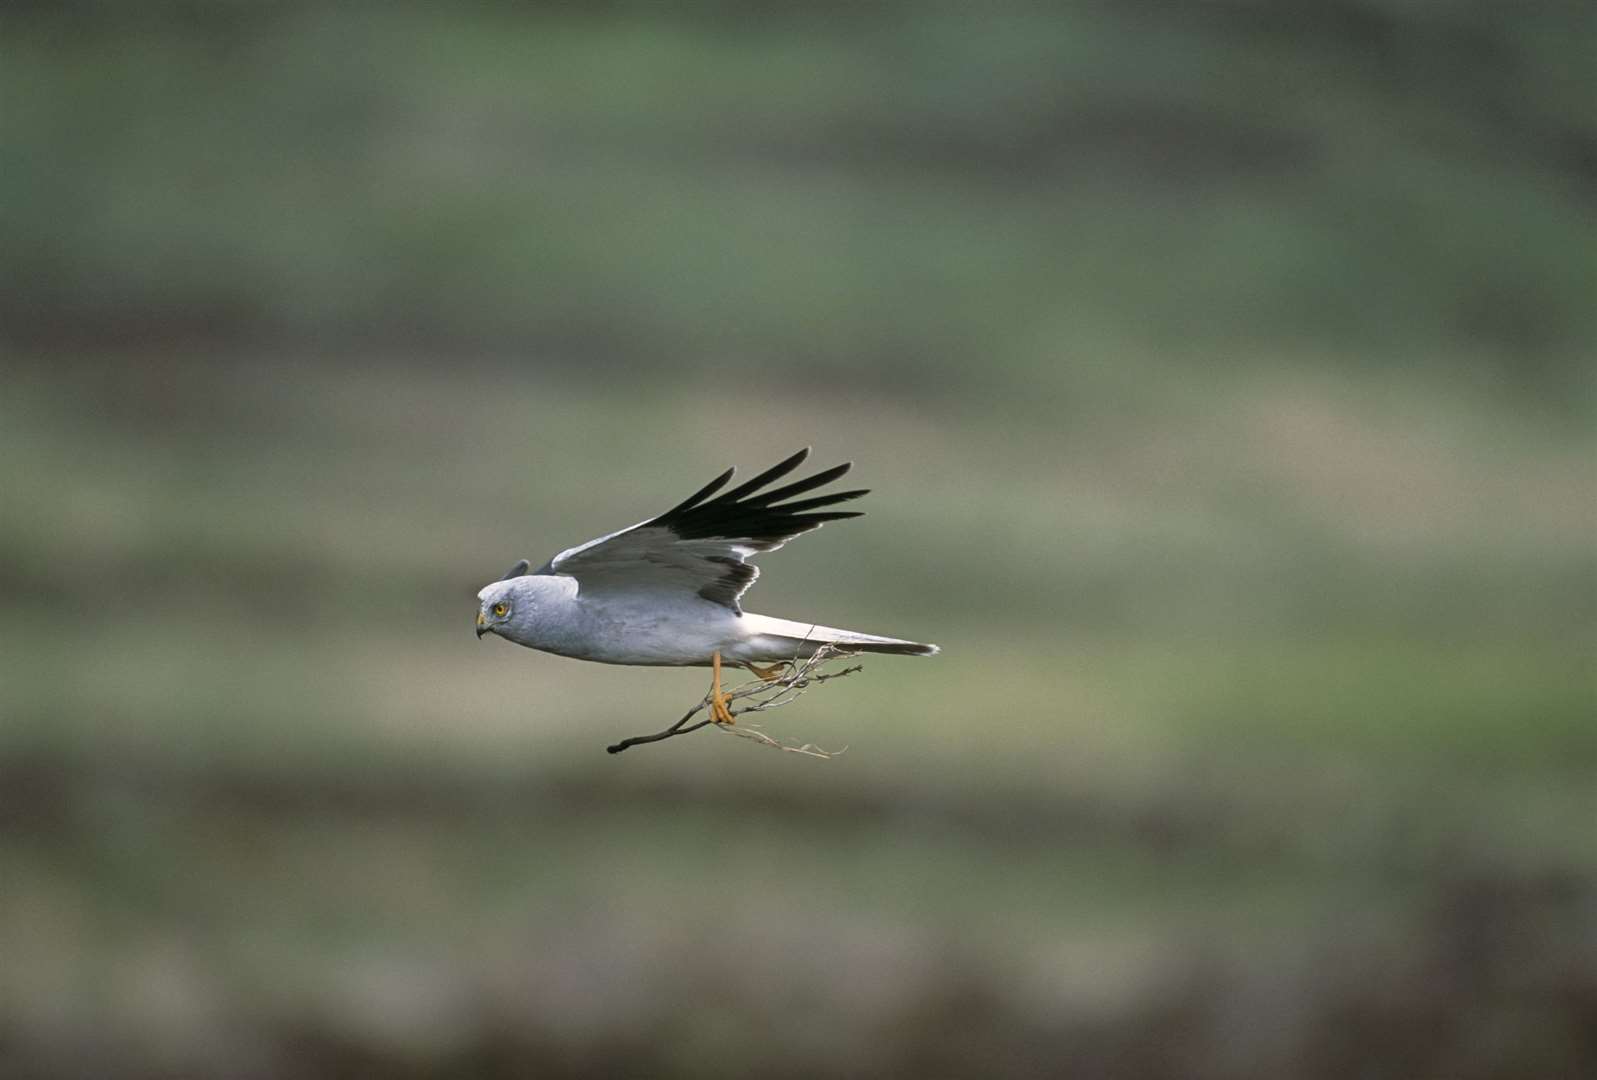 A male hen harrier in flight – the project hopes to shed more light on their behaviour. Picture: Andy Hay/RSPB